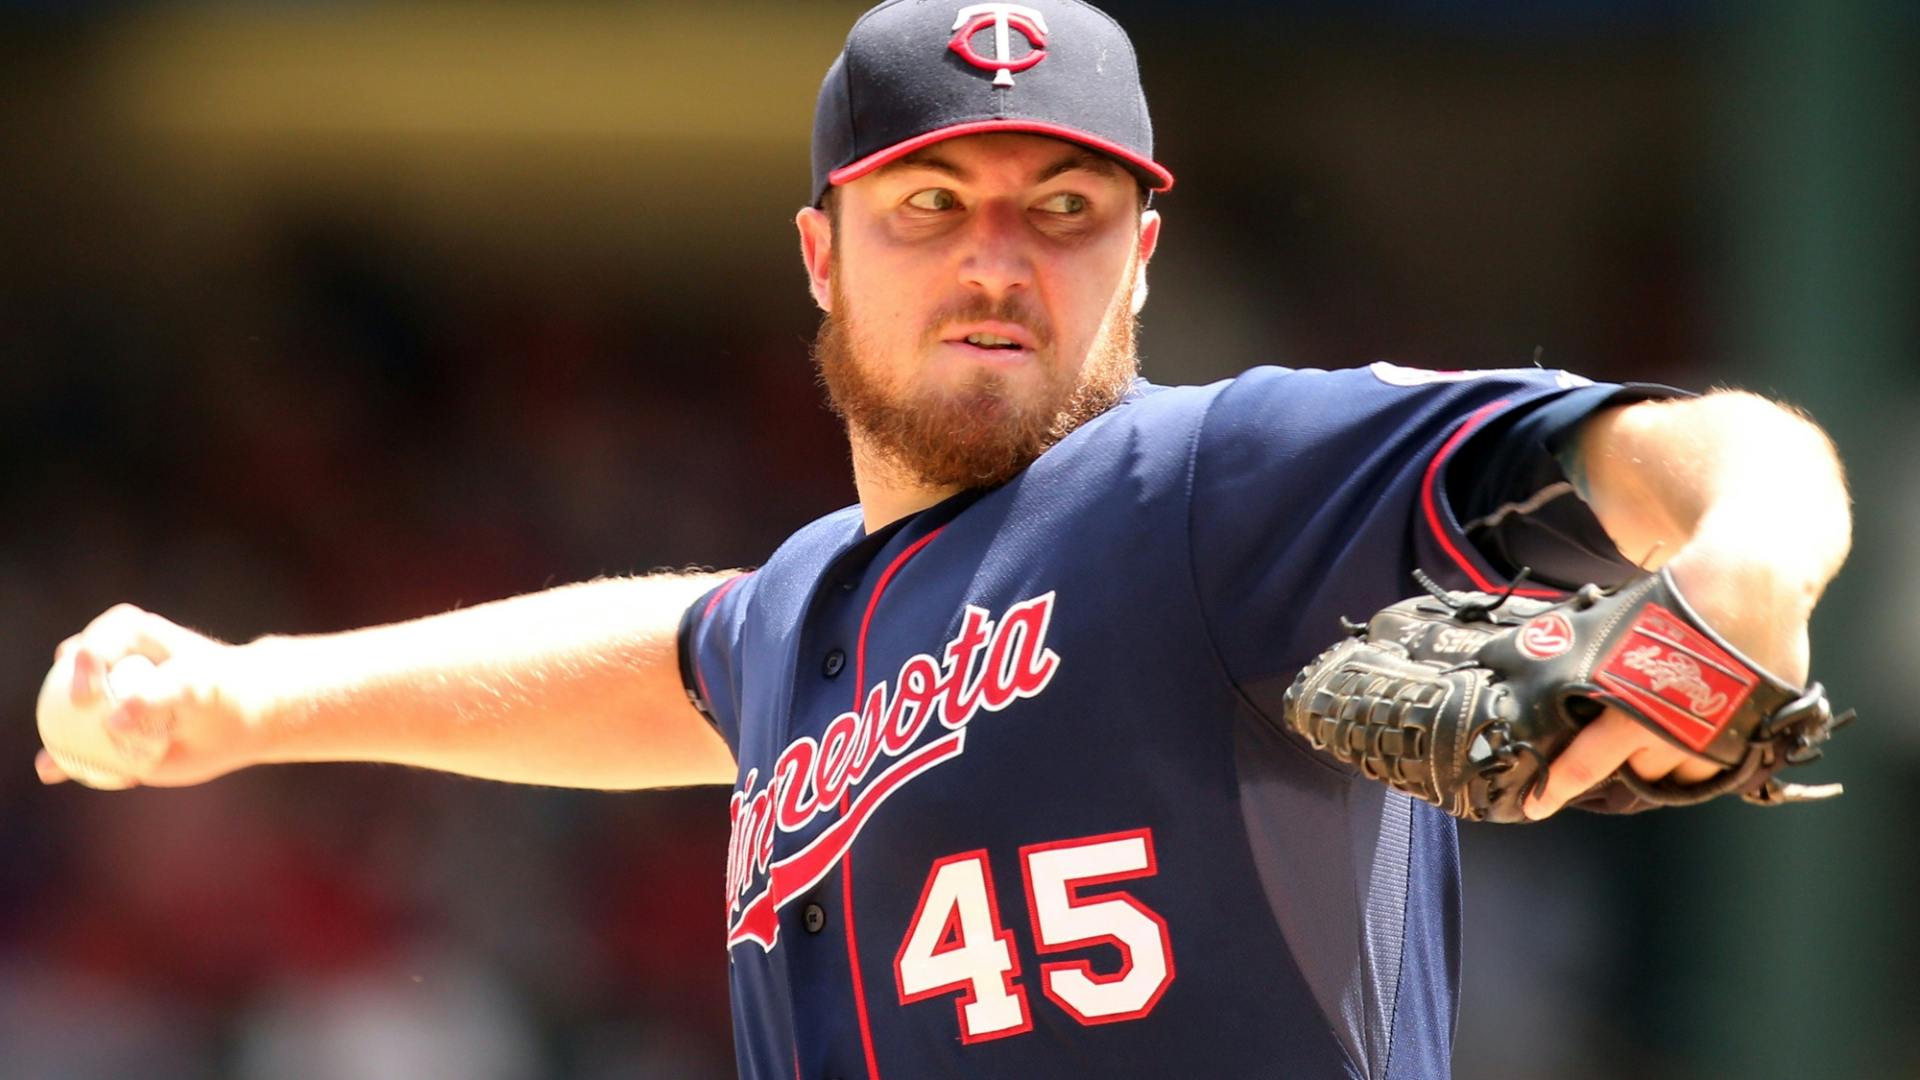 Twins righthander Phil Hughes says he hasn't had his best stuff all season, so he's happy he's able to keep Twins close.